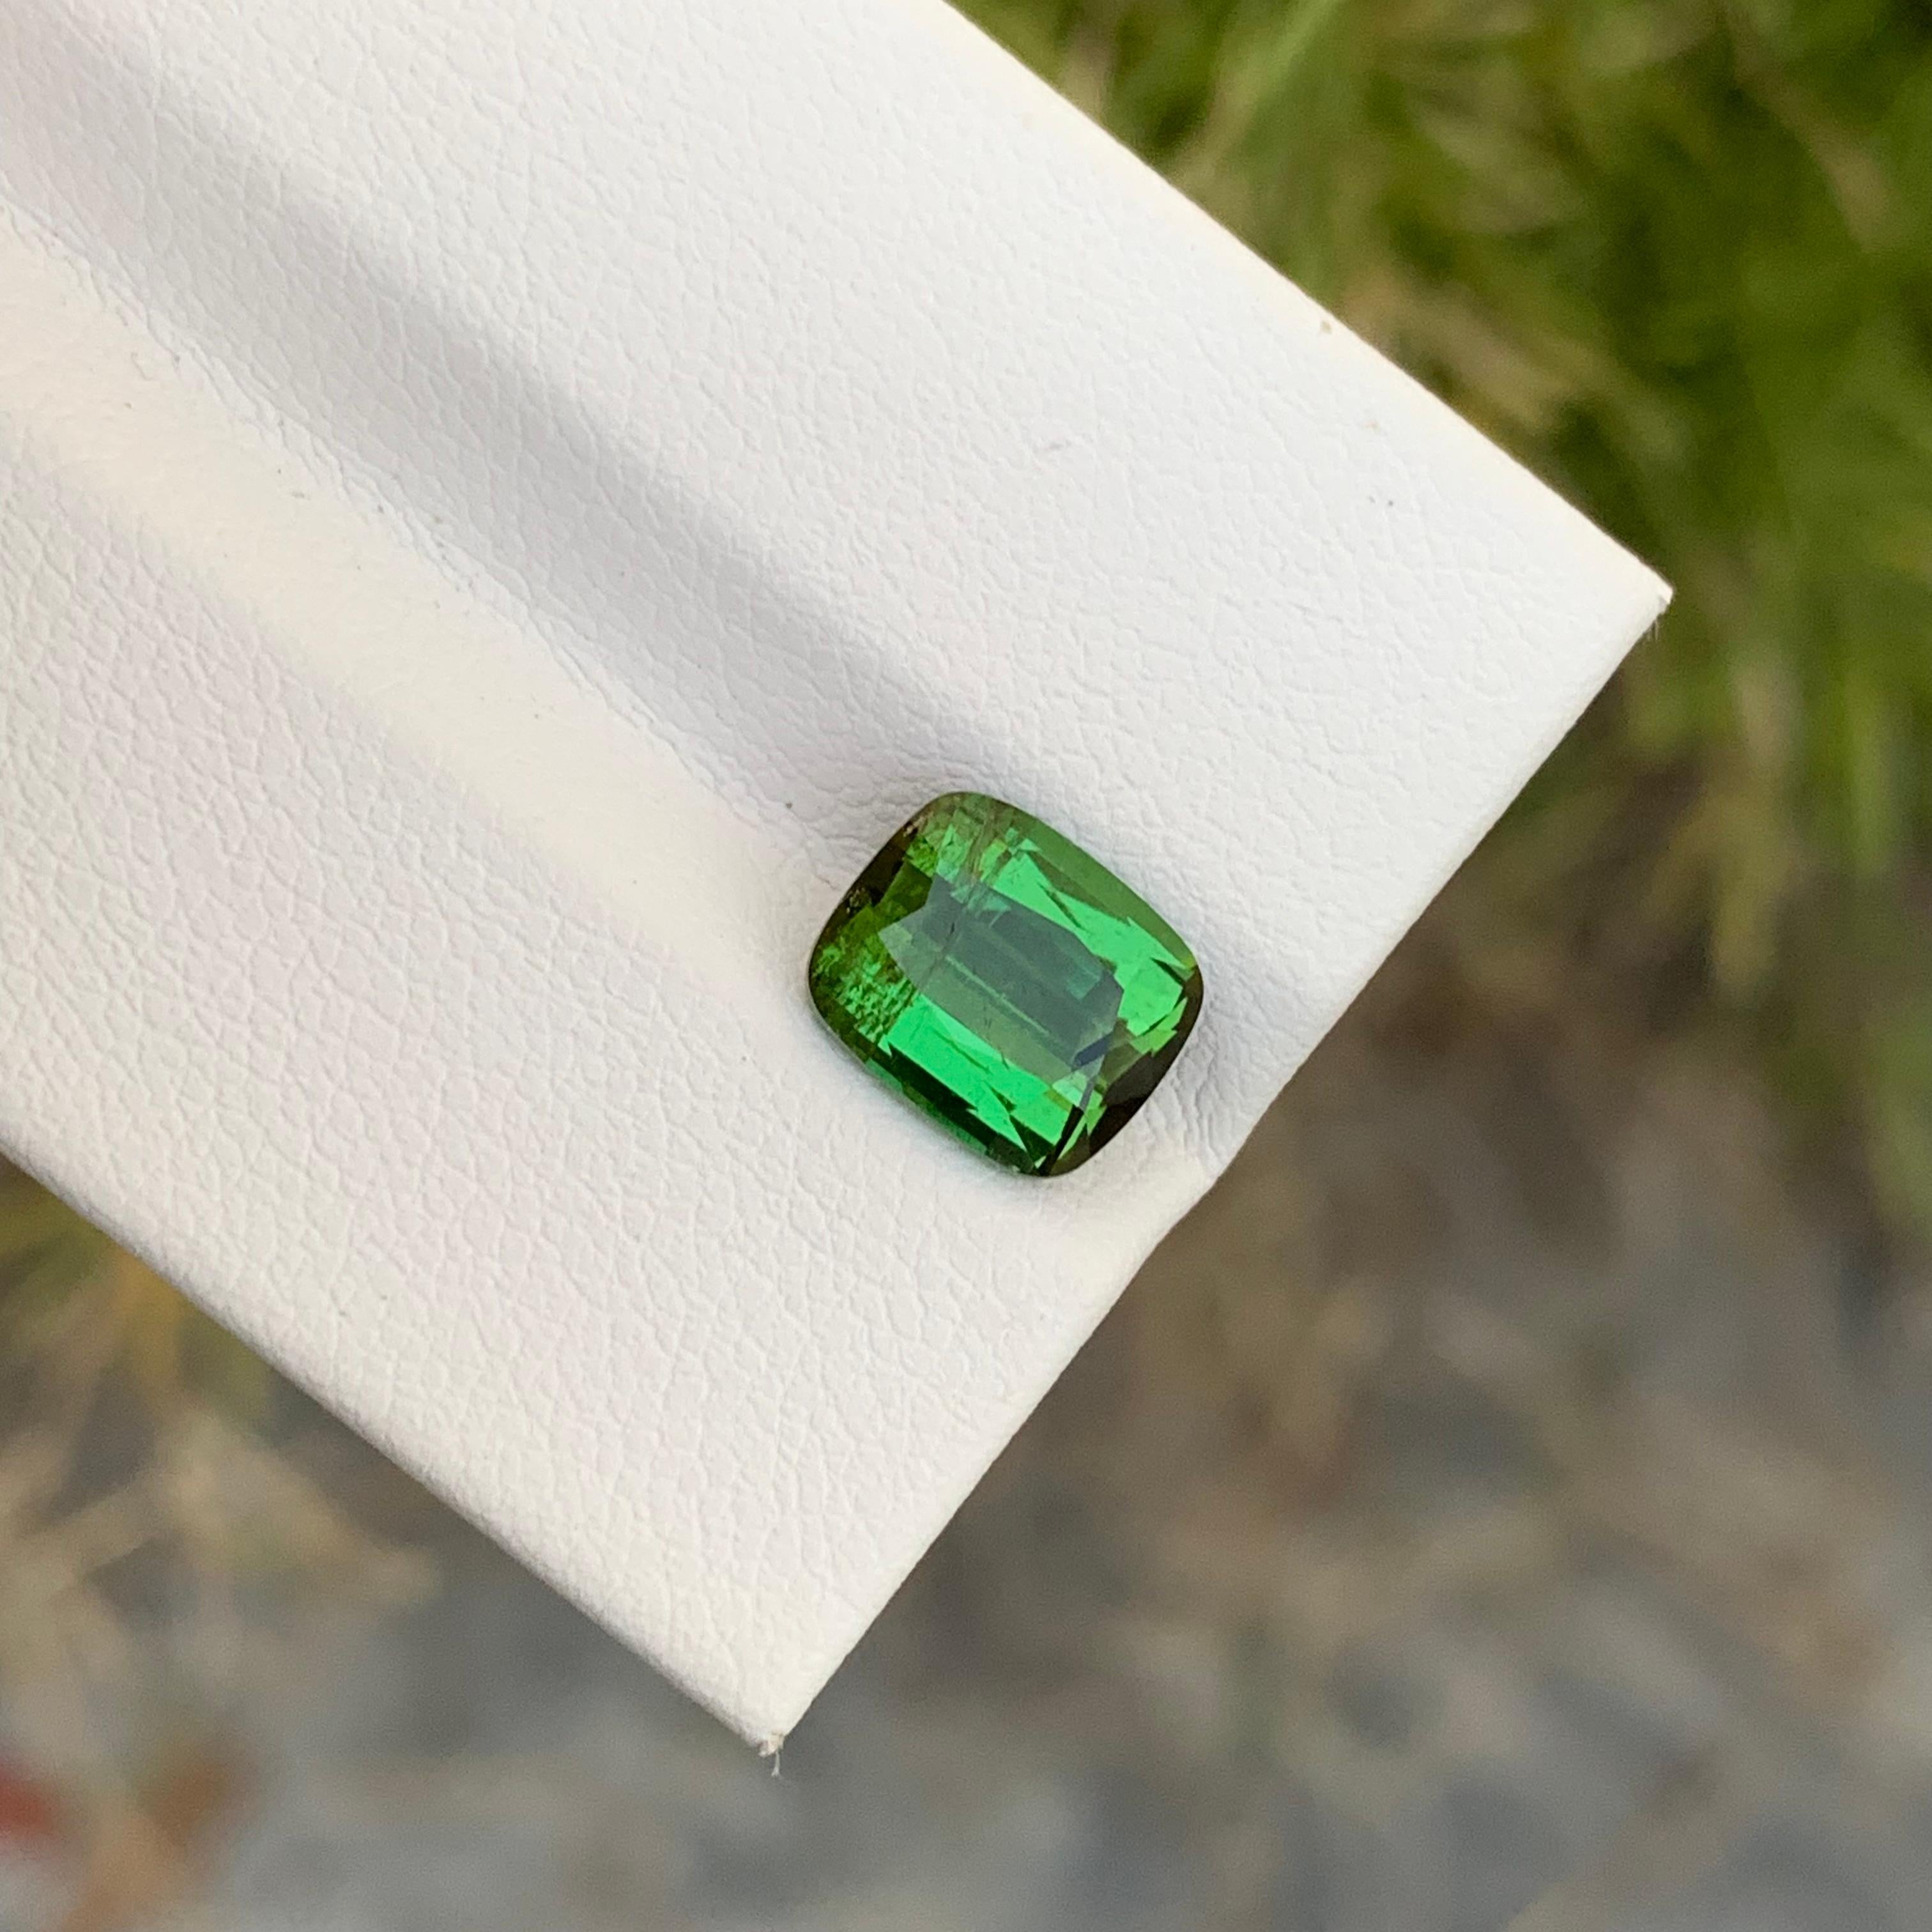 Loose Green Tourmaline

Weight: 2.30 Carats
Dimension: 8.3 x 6.9 x 4.9 Mm
Colour: Green
Origin: Afghanistan 
Certificate: On Demand
Treatment: Non

Tourmaline is a captivating gemstone known for its remarkable variety of colors, making it a favorite